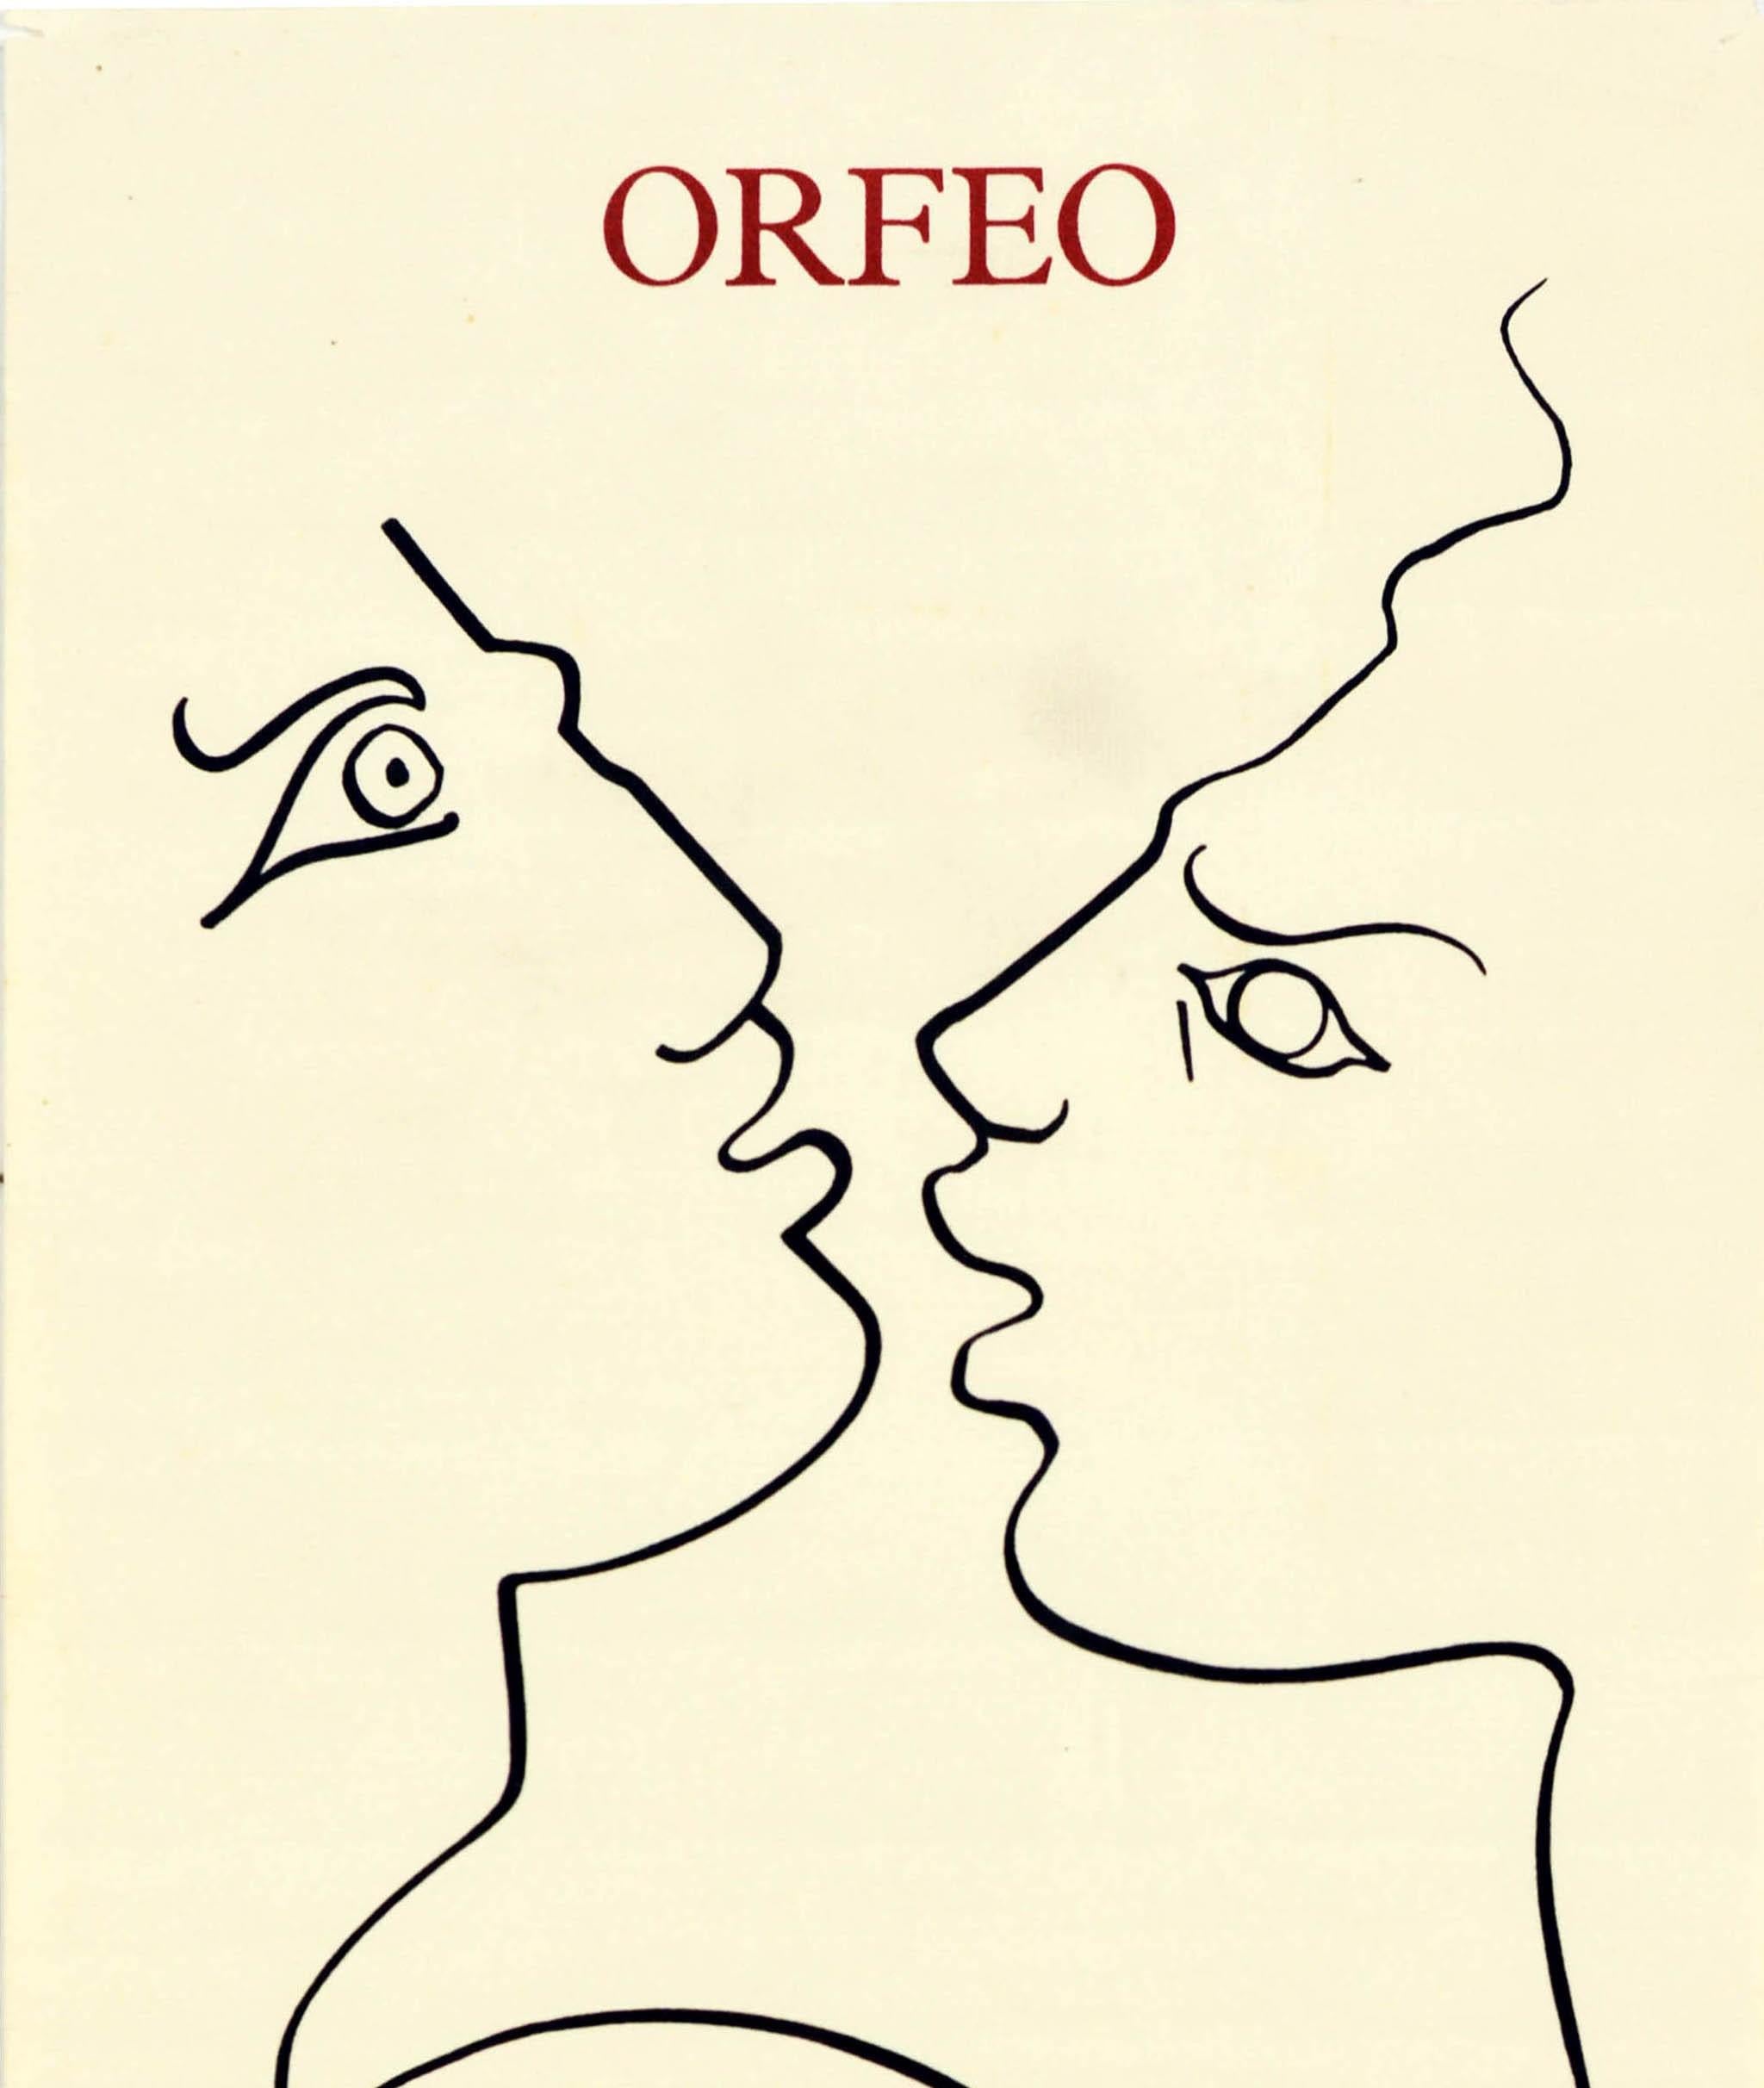 Original vintage advertising poster for the opera Orfeo written in 1607 by the notable Italian composer and priest Claudio Monteverdi (Claudio Giovanni Antonio Monteverdi; baptised 1567-1643), performed at the Opera De Lyon featuring a simple black